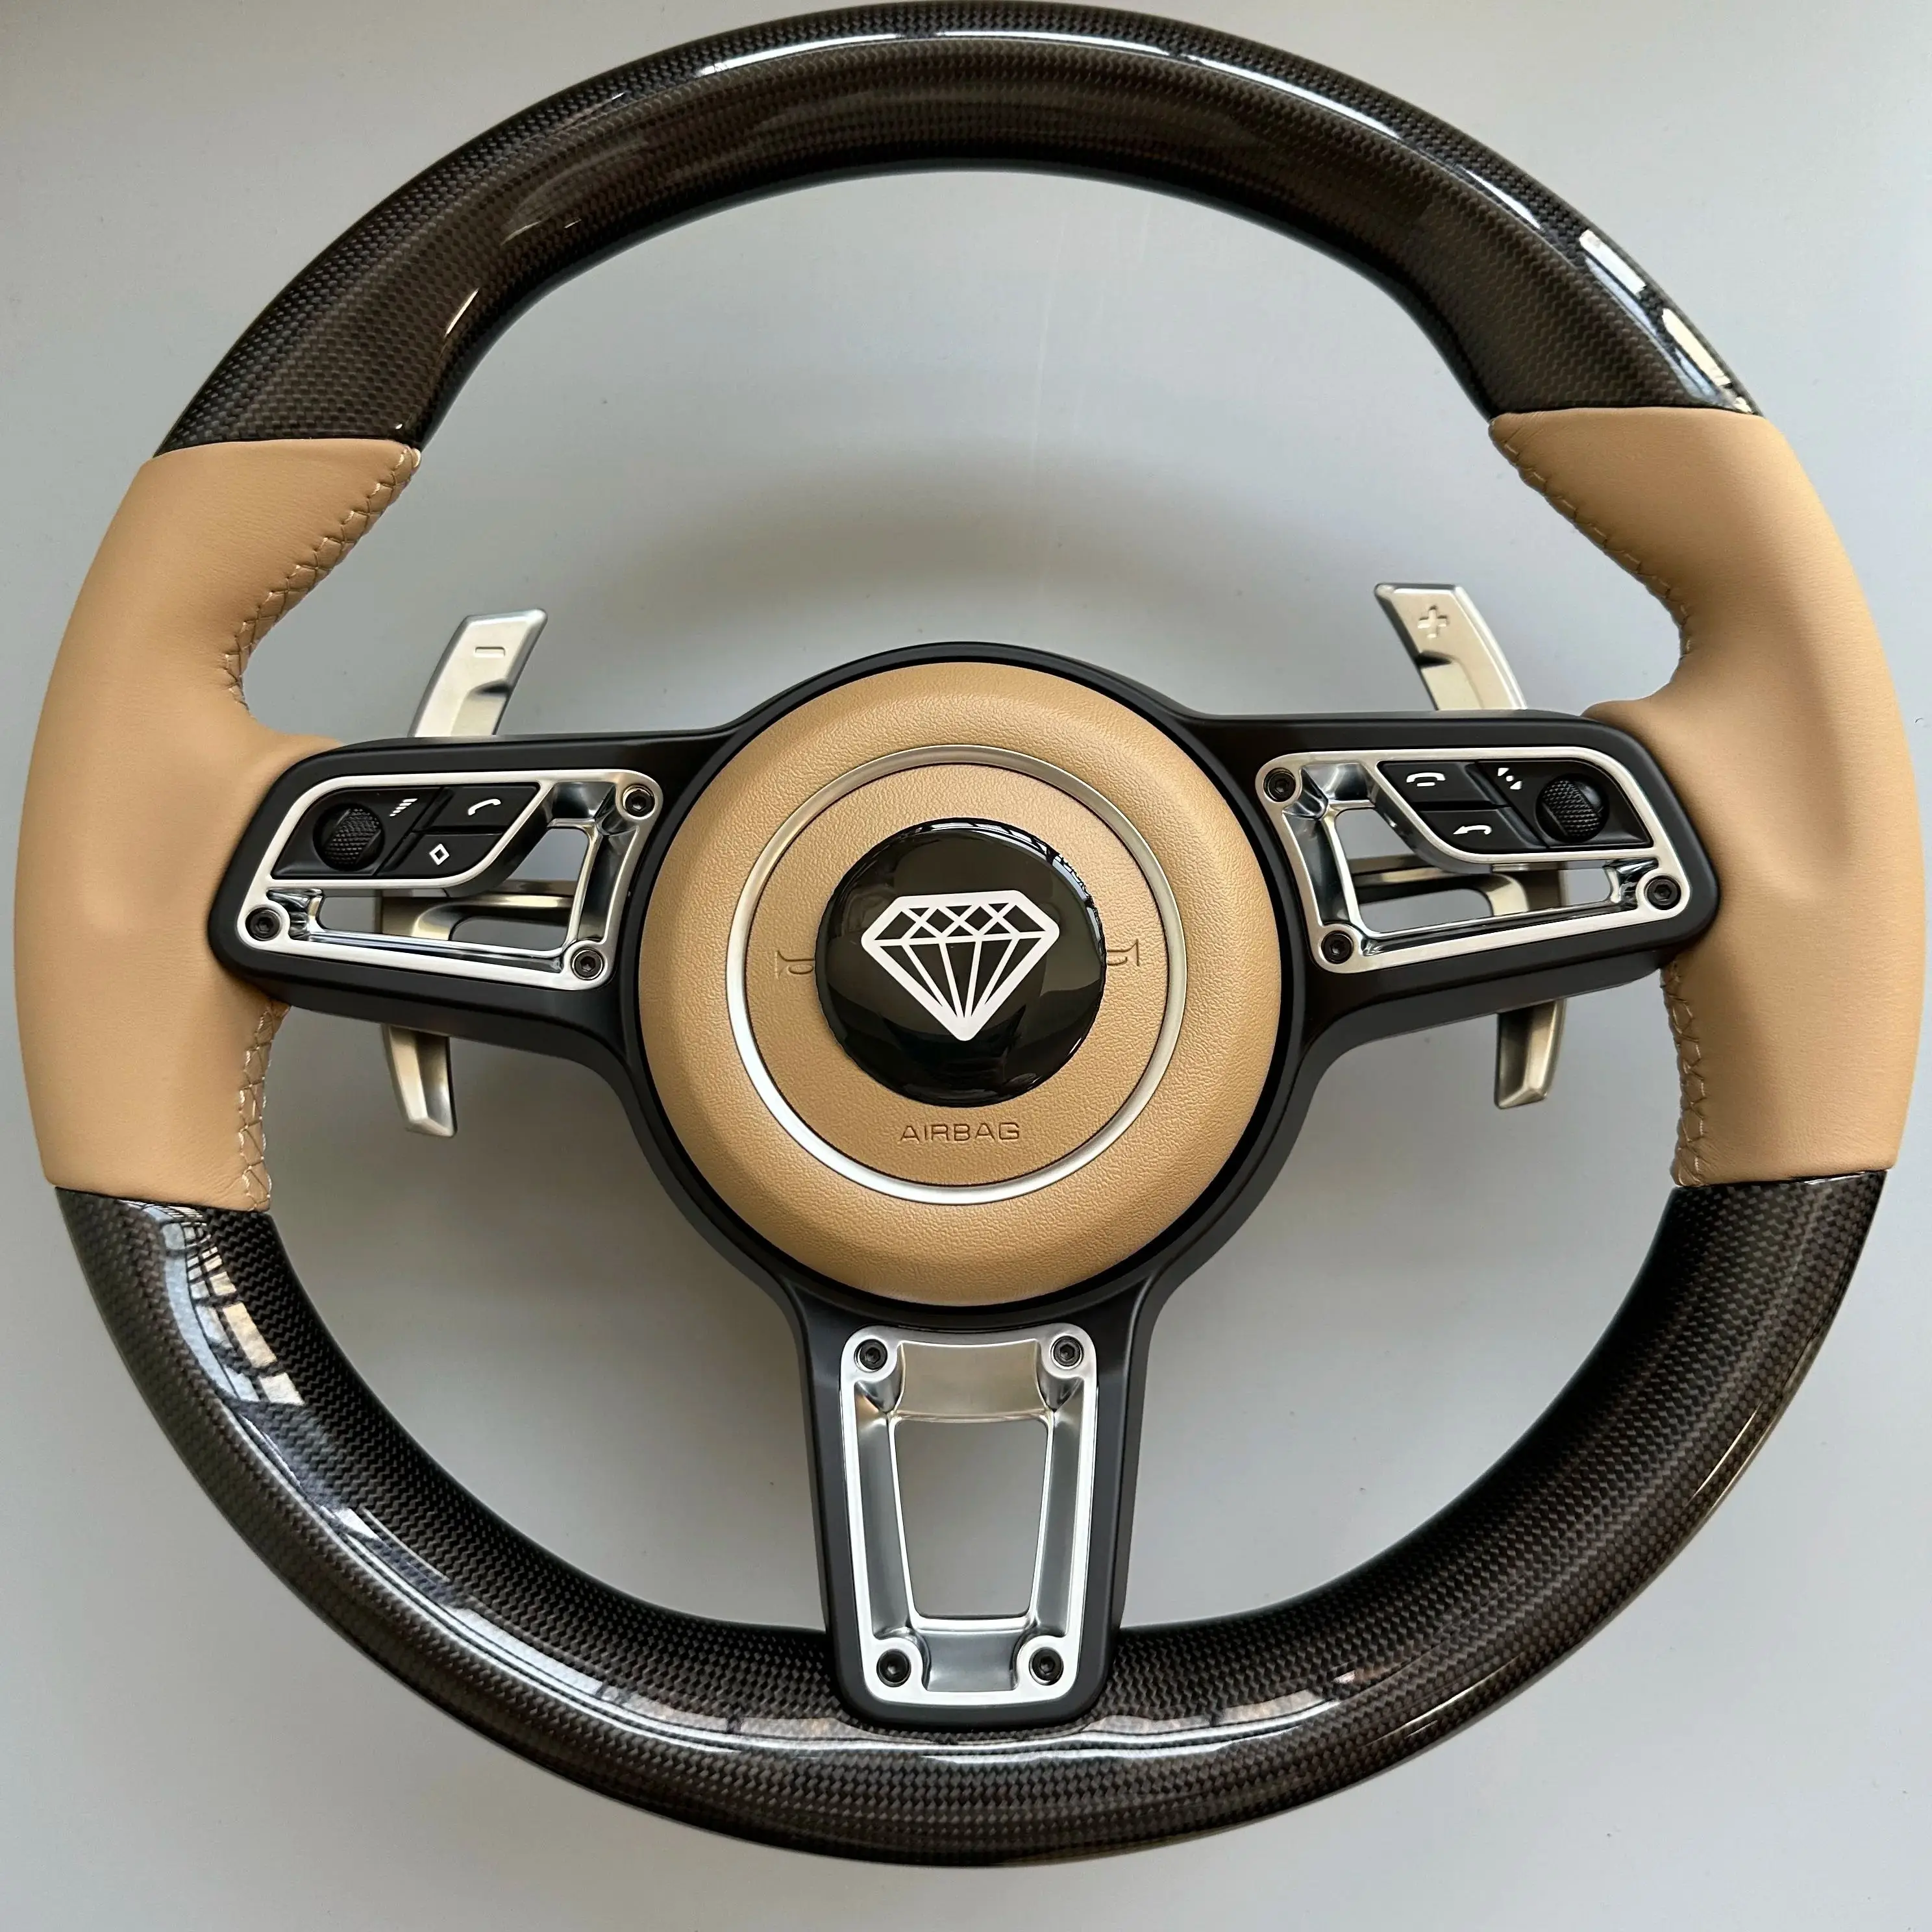 

Car Steering wheel for Porsche Panamera Macan Cayenne Taycan 718 Cayman GT4 RS 911 Carrera Targa 911 GT3 RS 911.2 991 992 GT2 RS